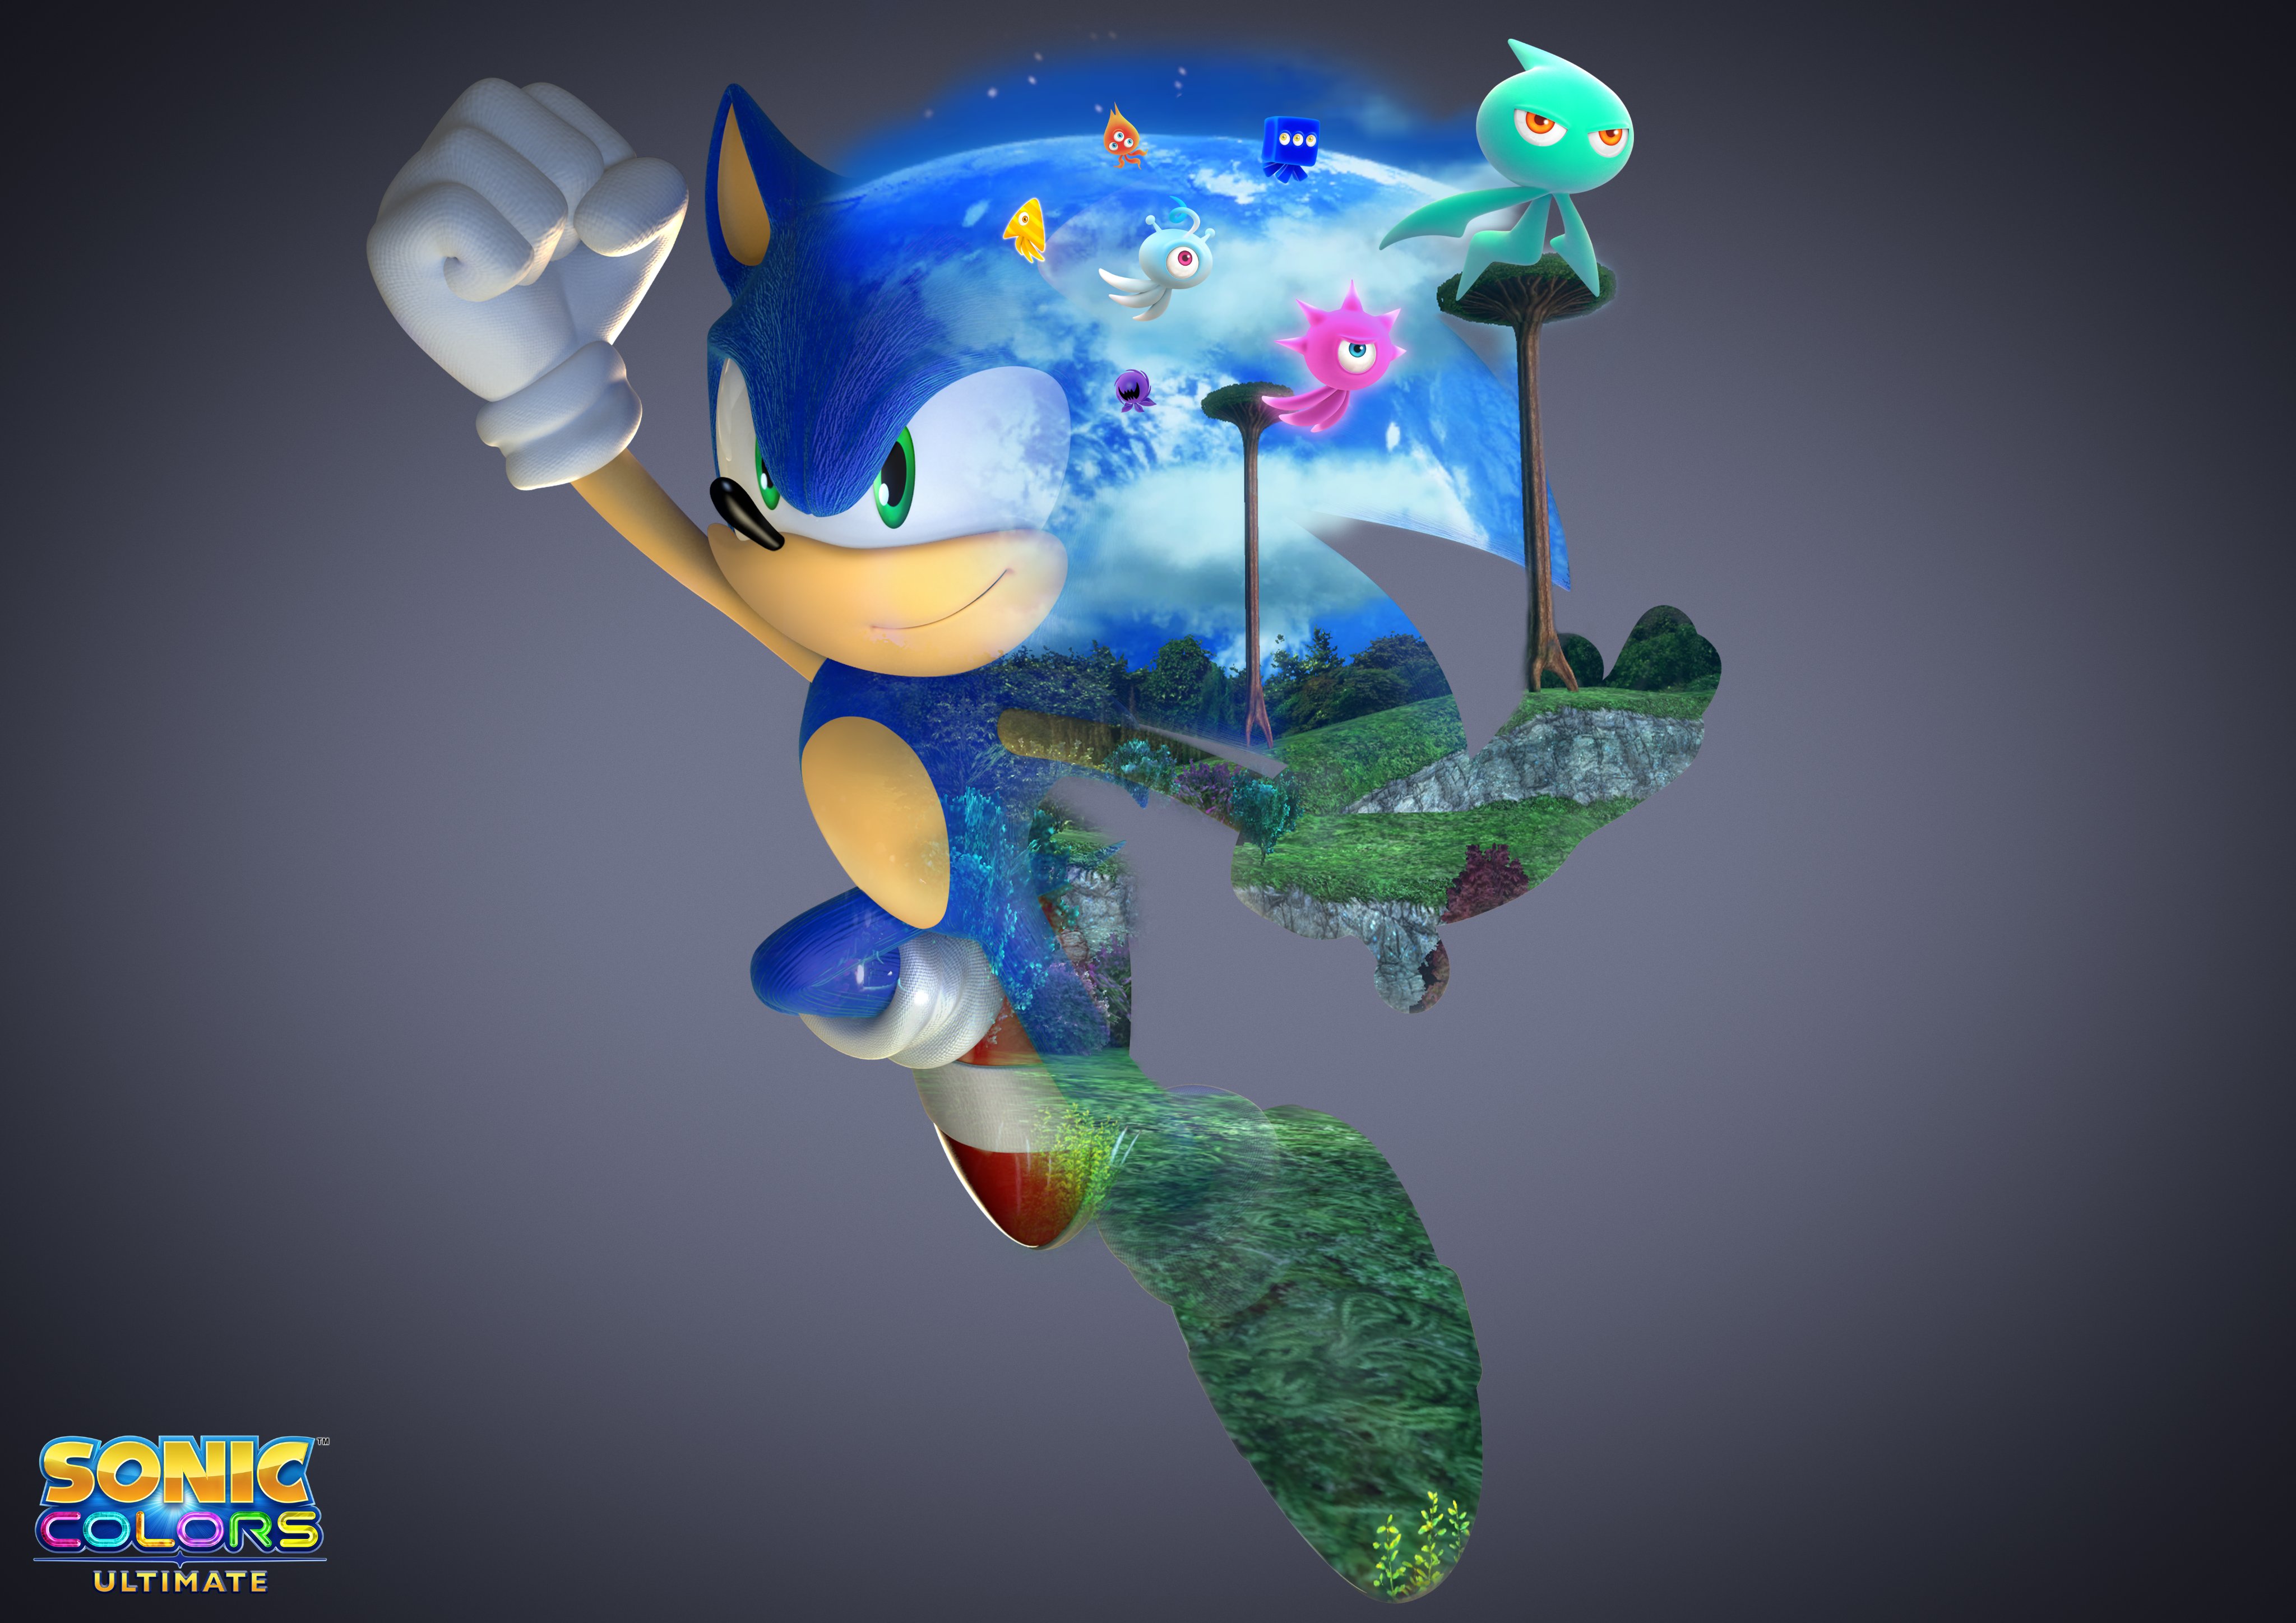 video game, sonic colors: ultimate, sonic the hedgehog